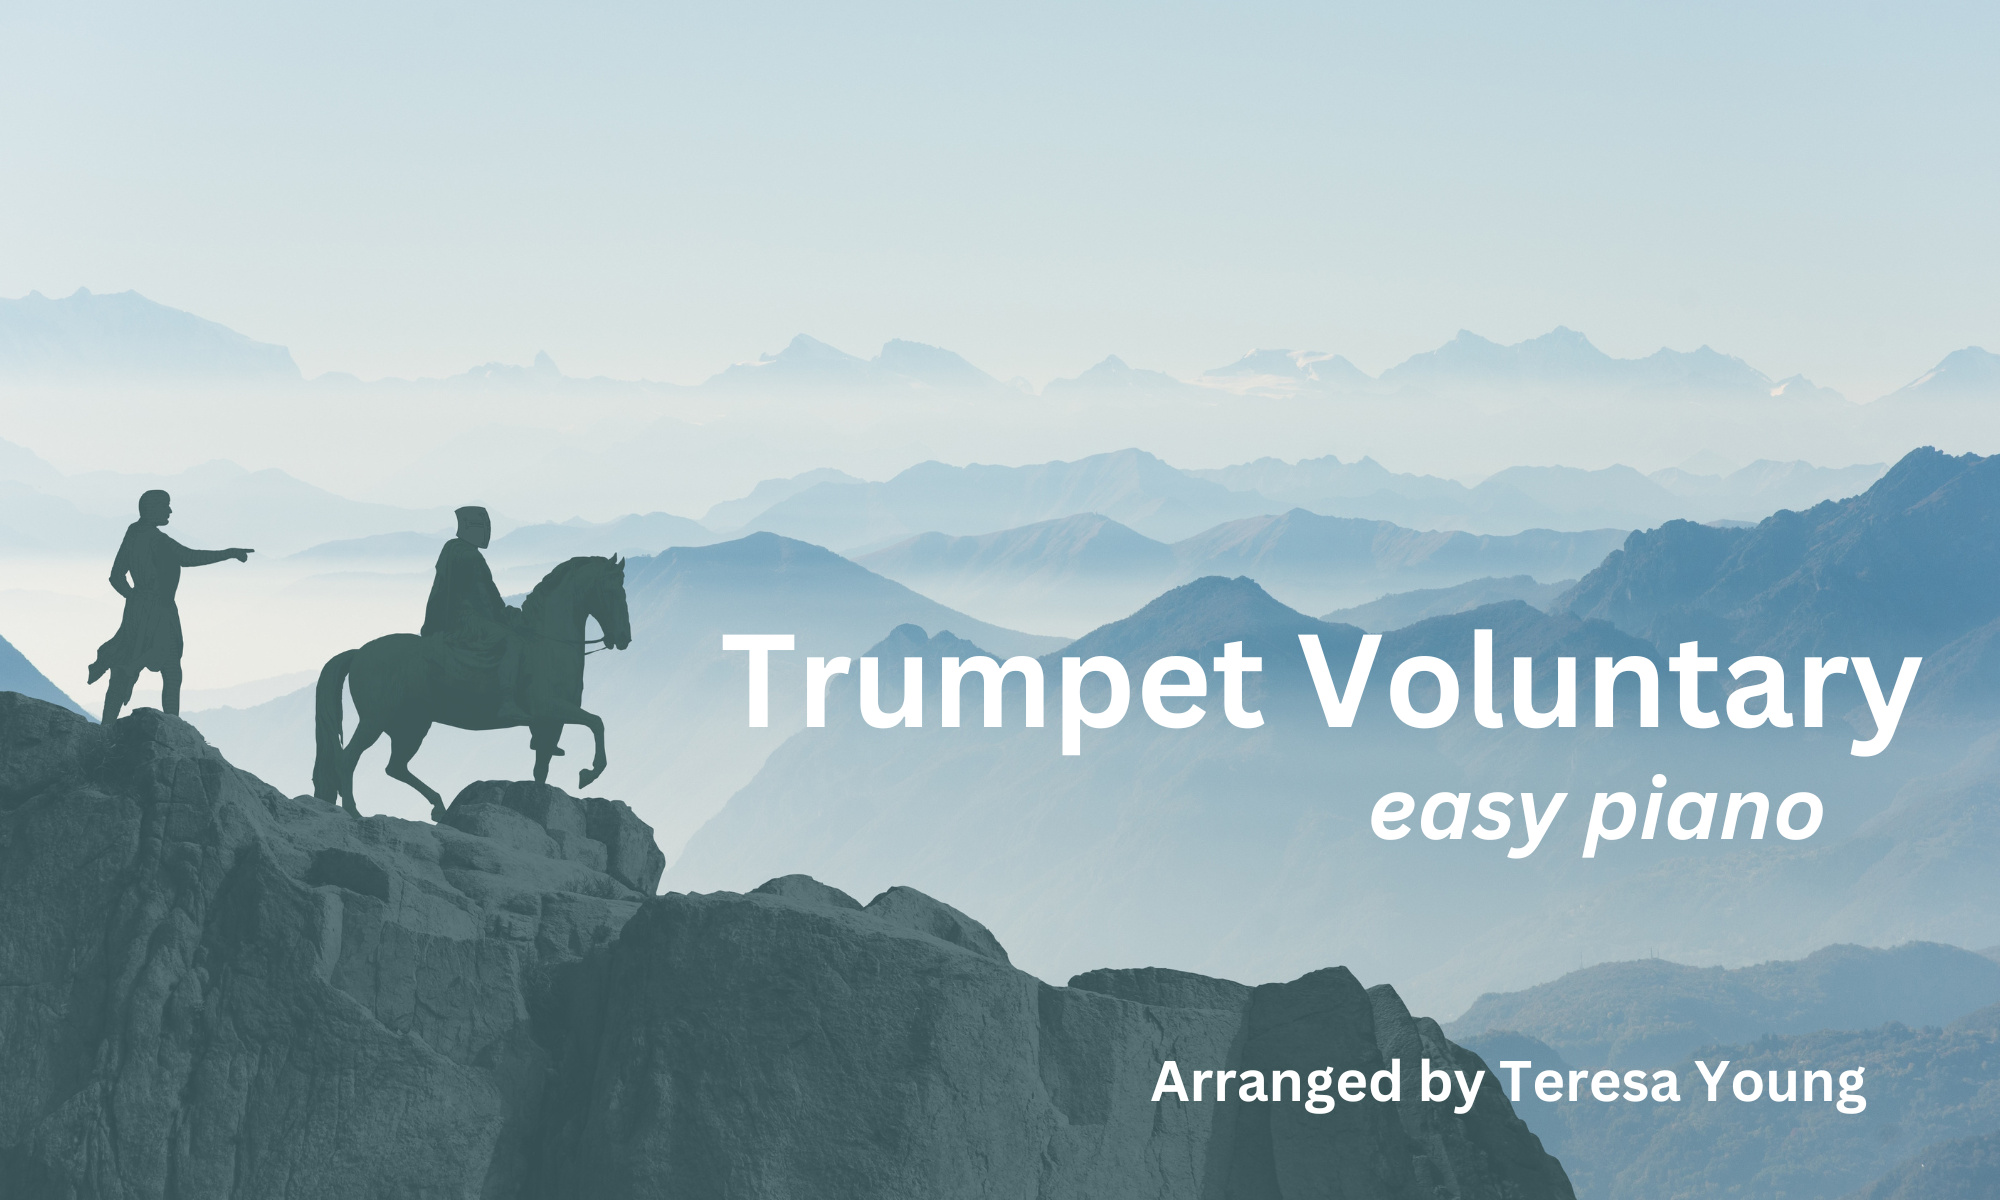 Trumpet Voluntary, for easy piano, arranged by Teresa Young